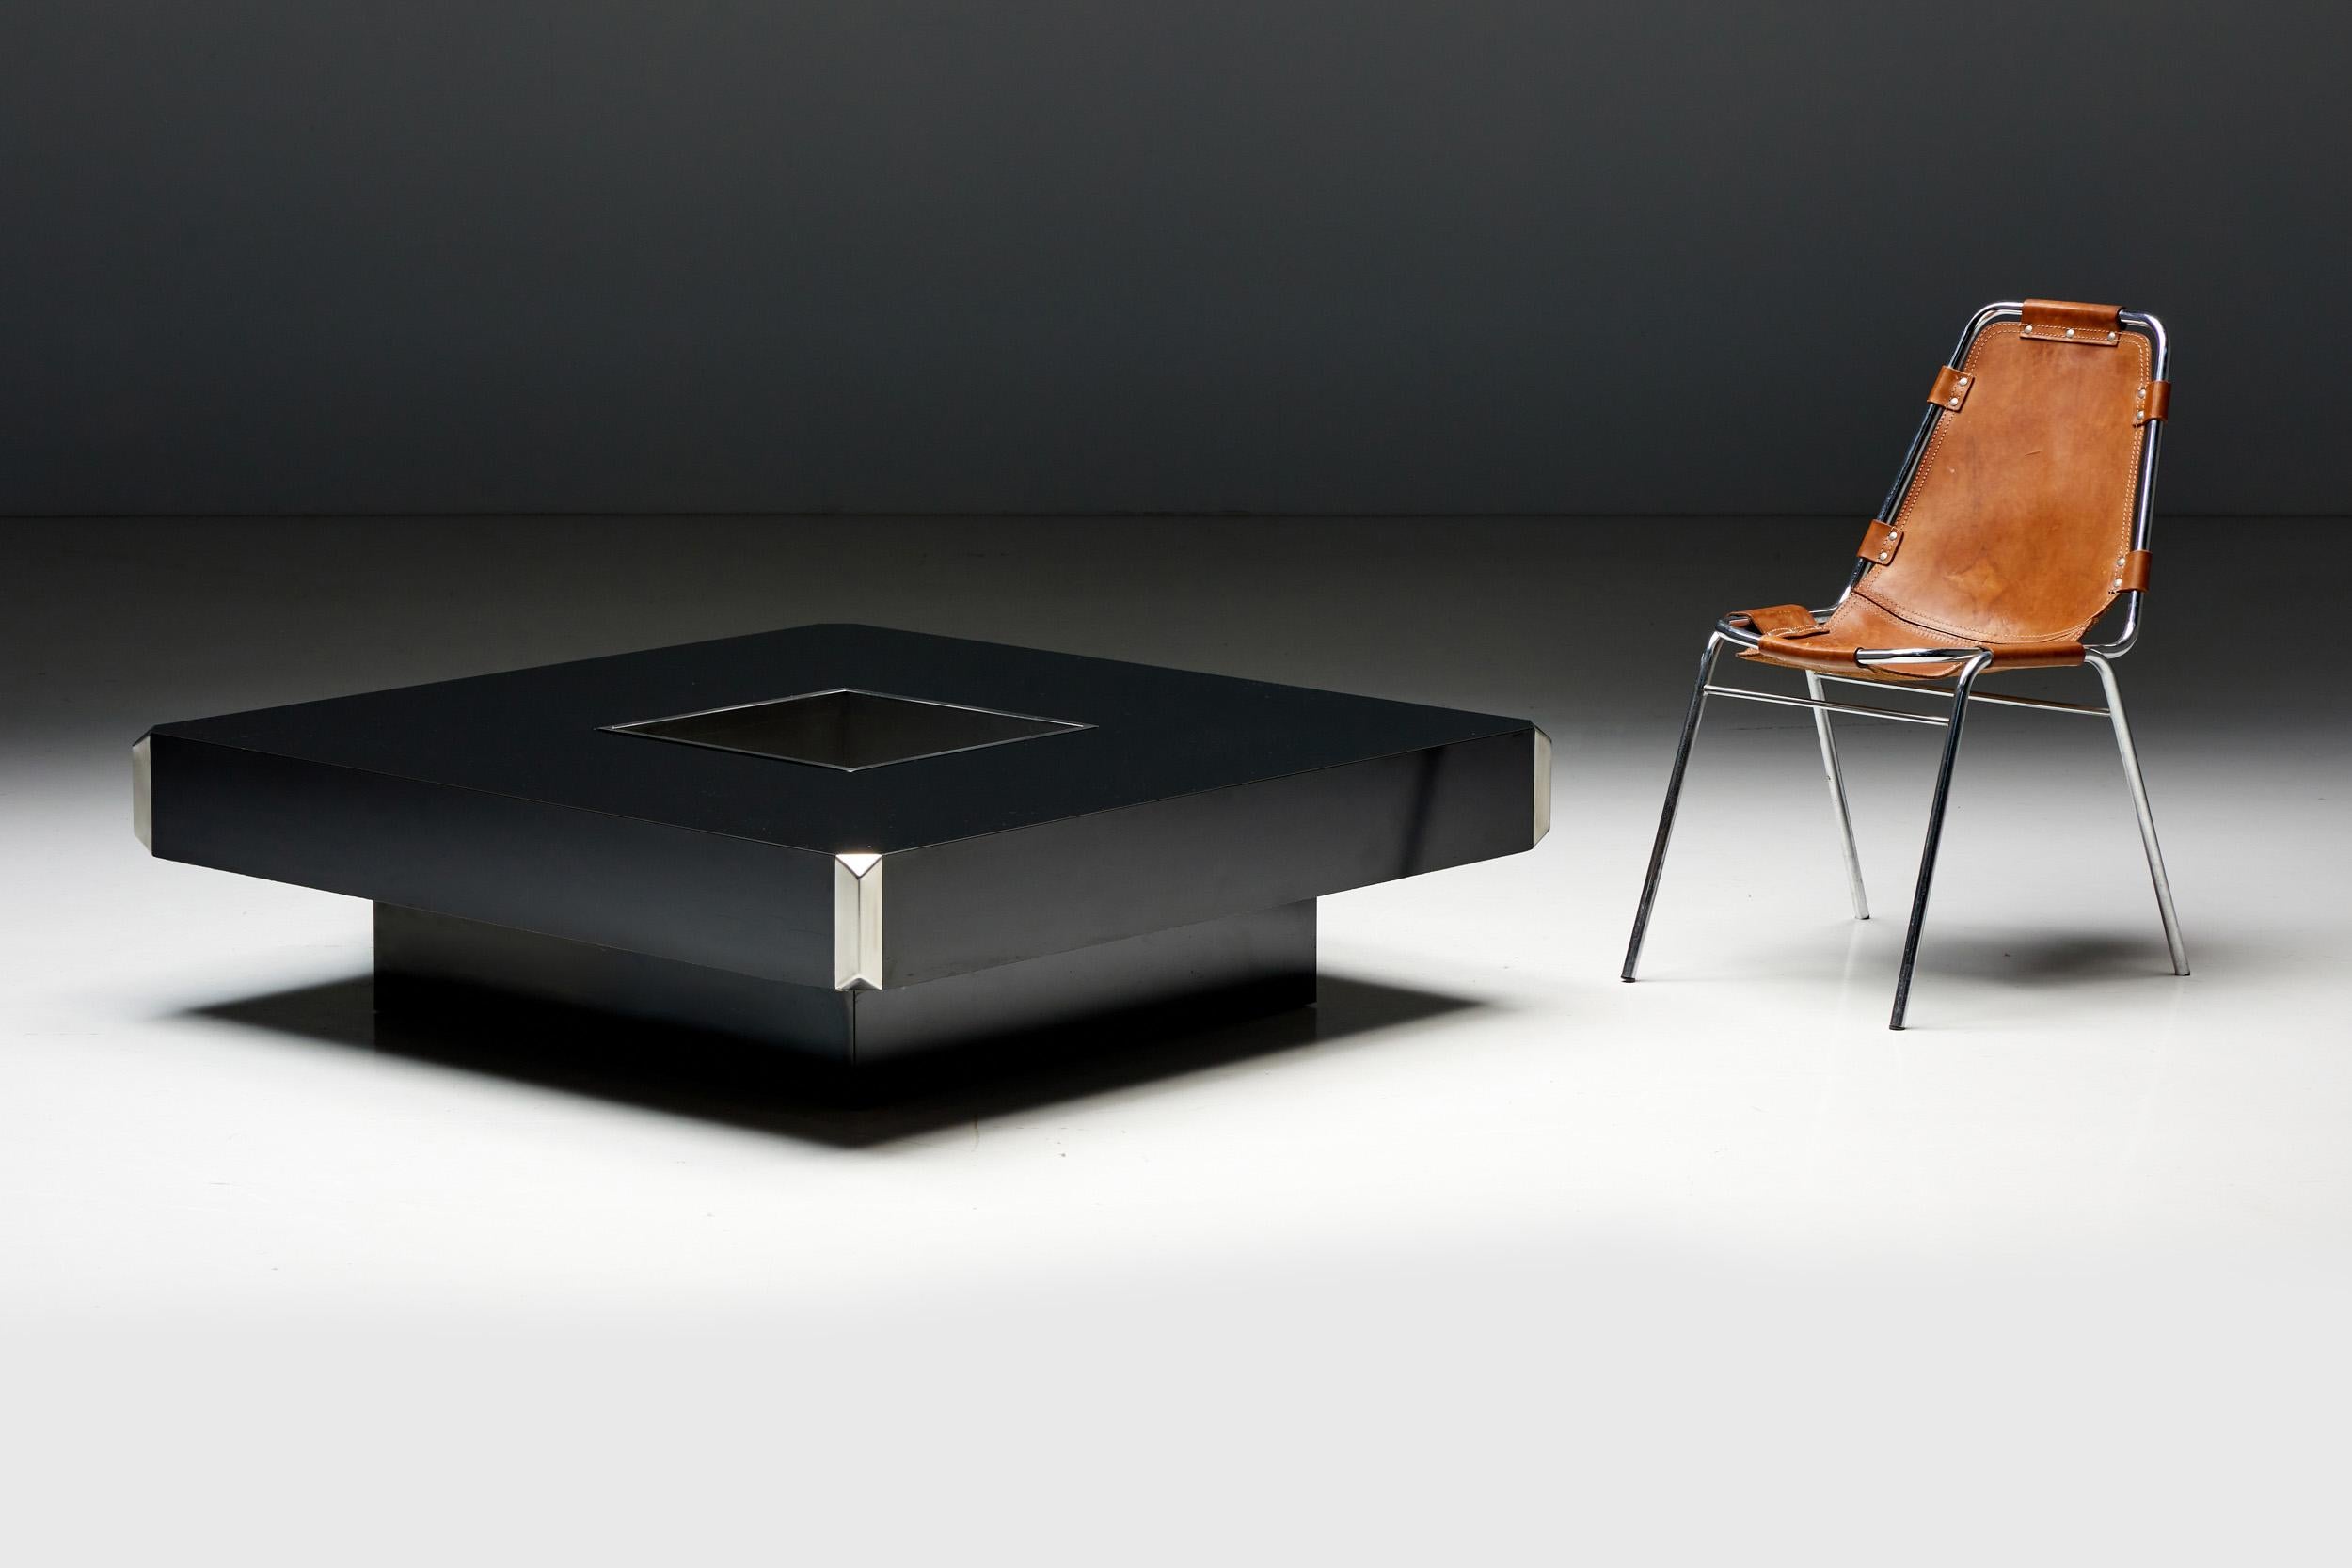 Hollywood Regency; Willy Rizzo; Black Formica; 1970s; Space Age; Italy; Mid-Century Modern; 20th Century; Modernist;

Rectangular cocktail table designed by Willy Rizzo for Cidue in the 1970s. This iconic coffee table boasts a sleek black formica